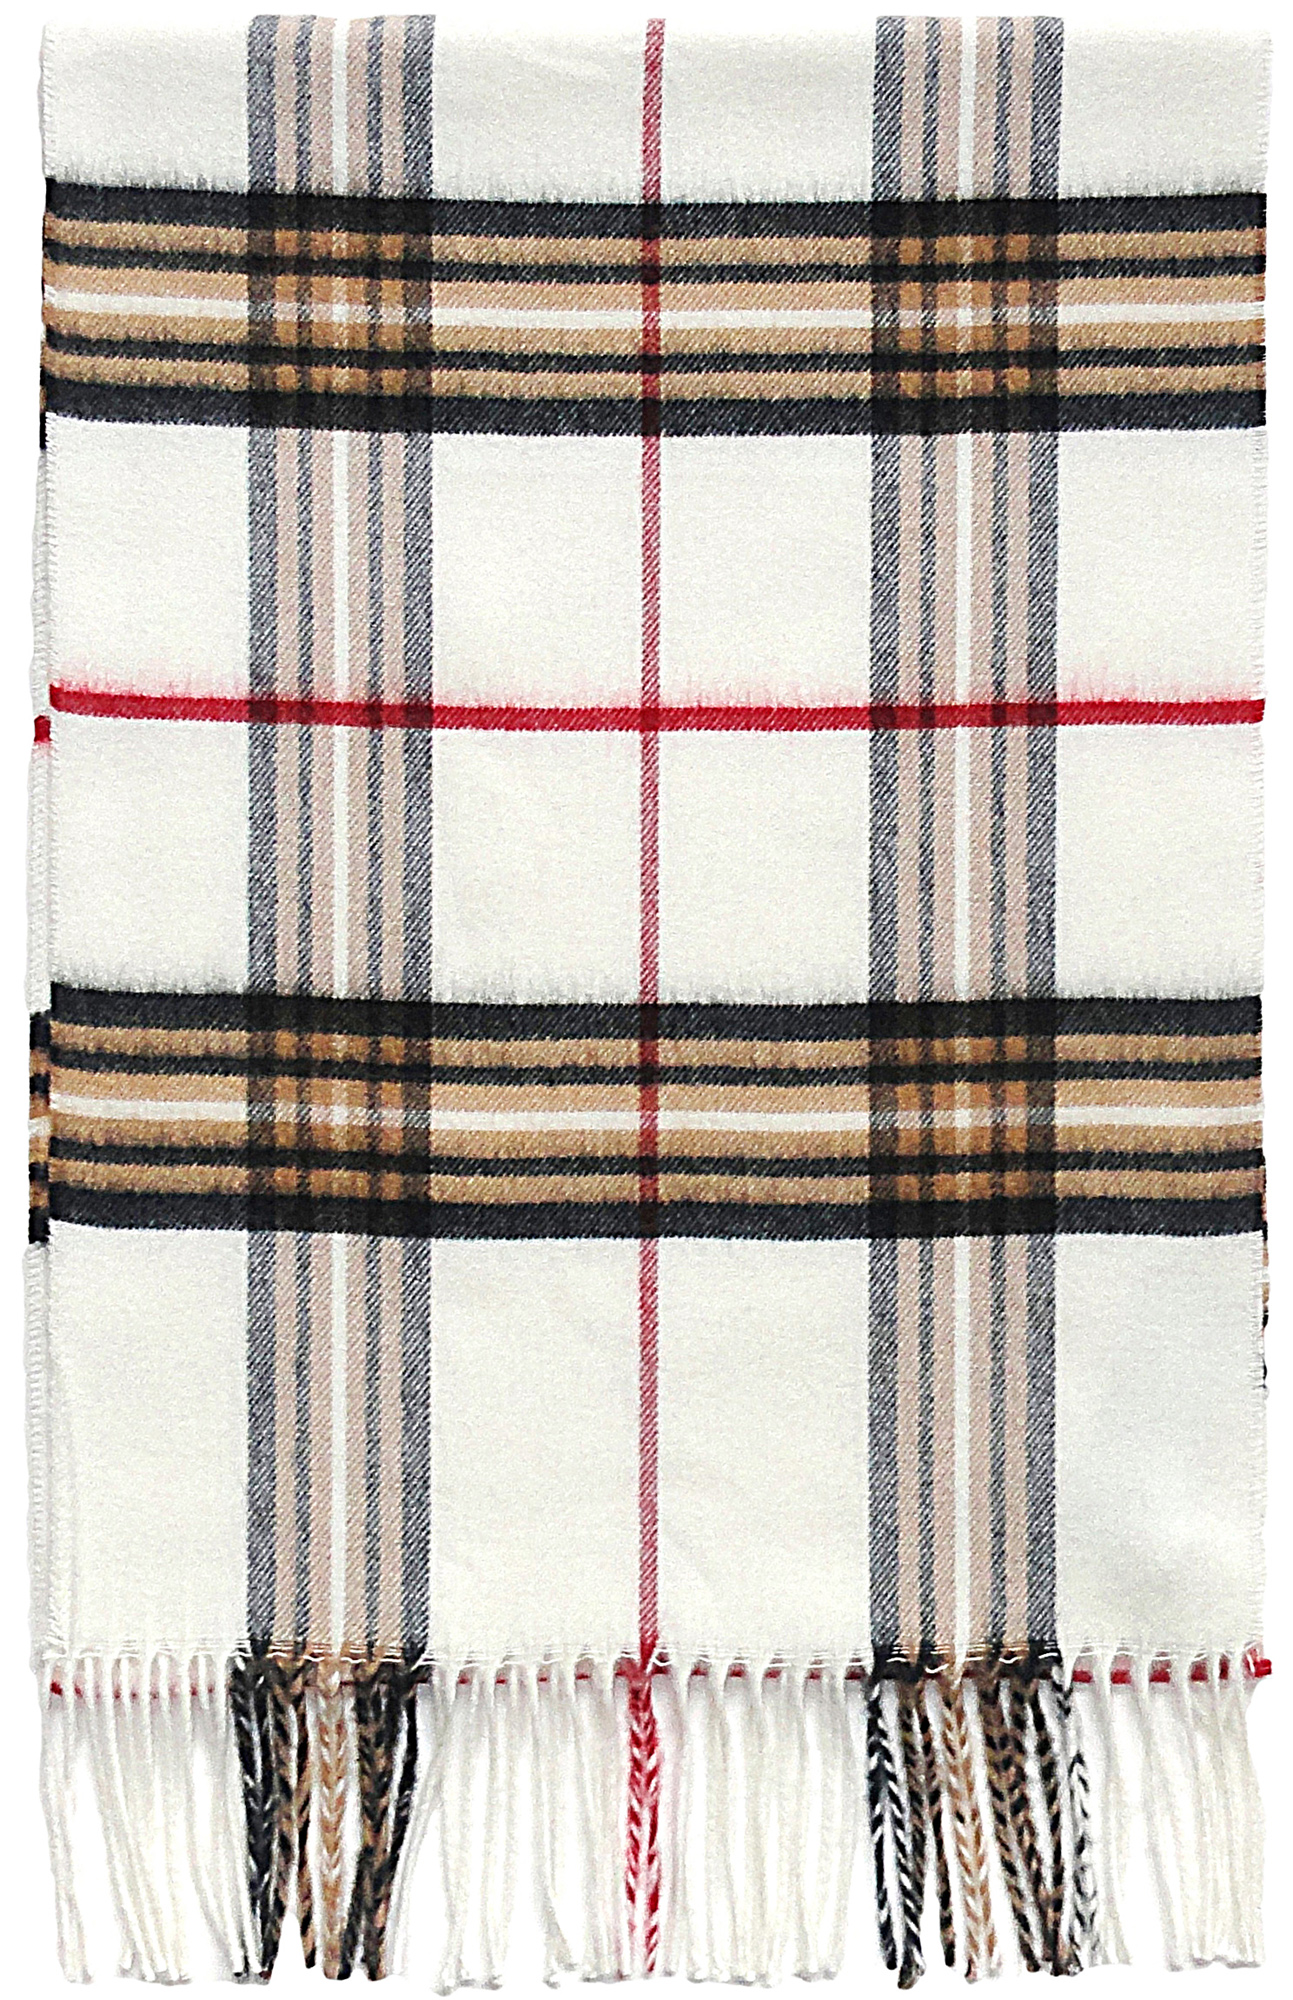 Fraas Plaid in White- $35.00
Cashmink, Made in Germany
771899115525
